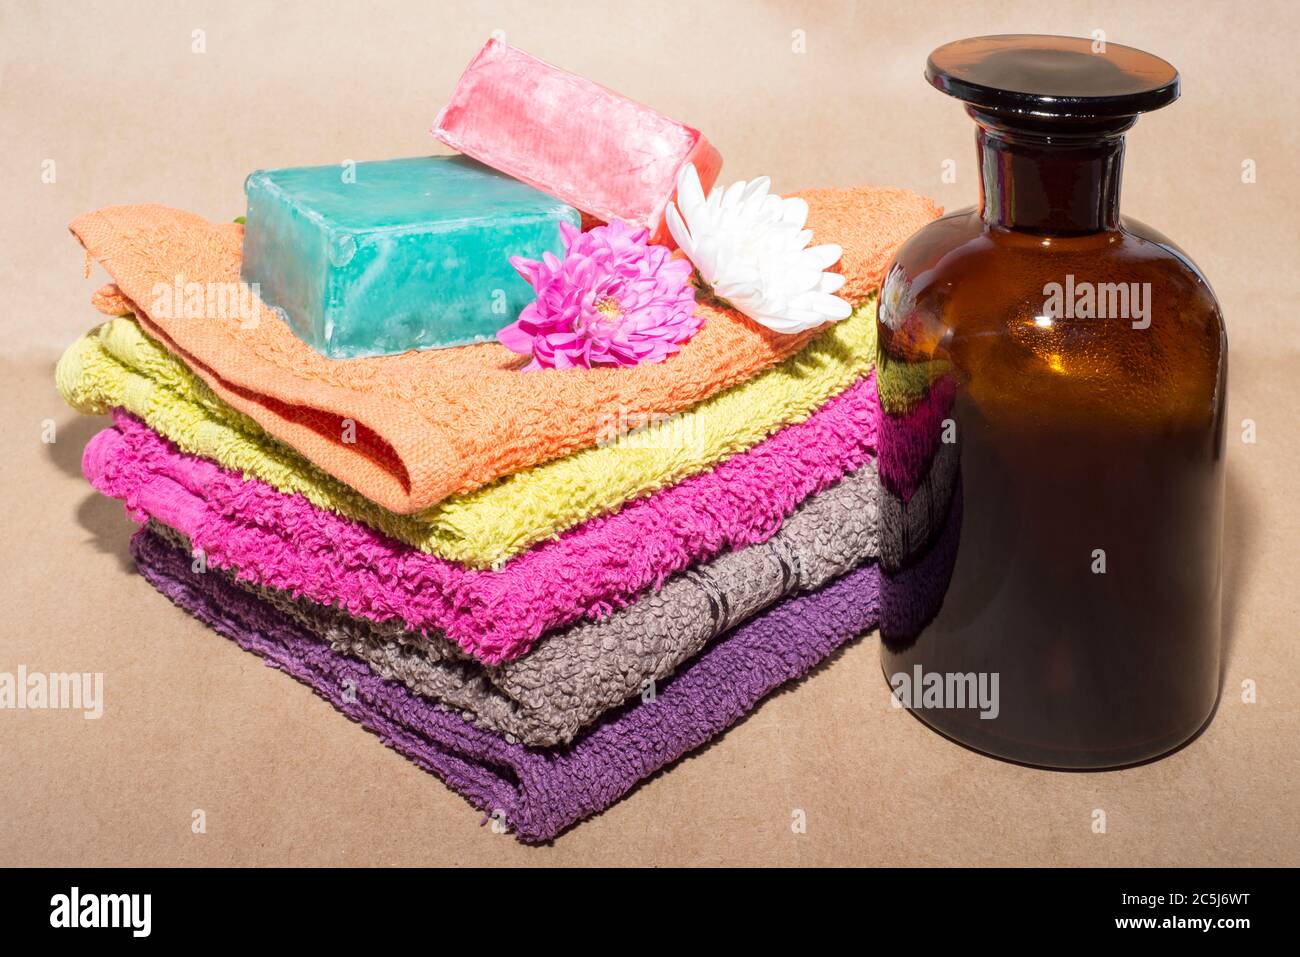 soap bar on top of facecloths off various shades with flowers and bottle Stock Photo